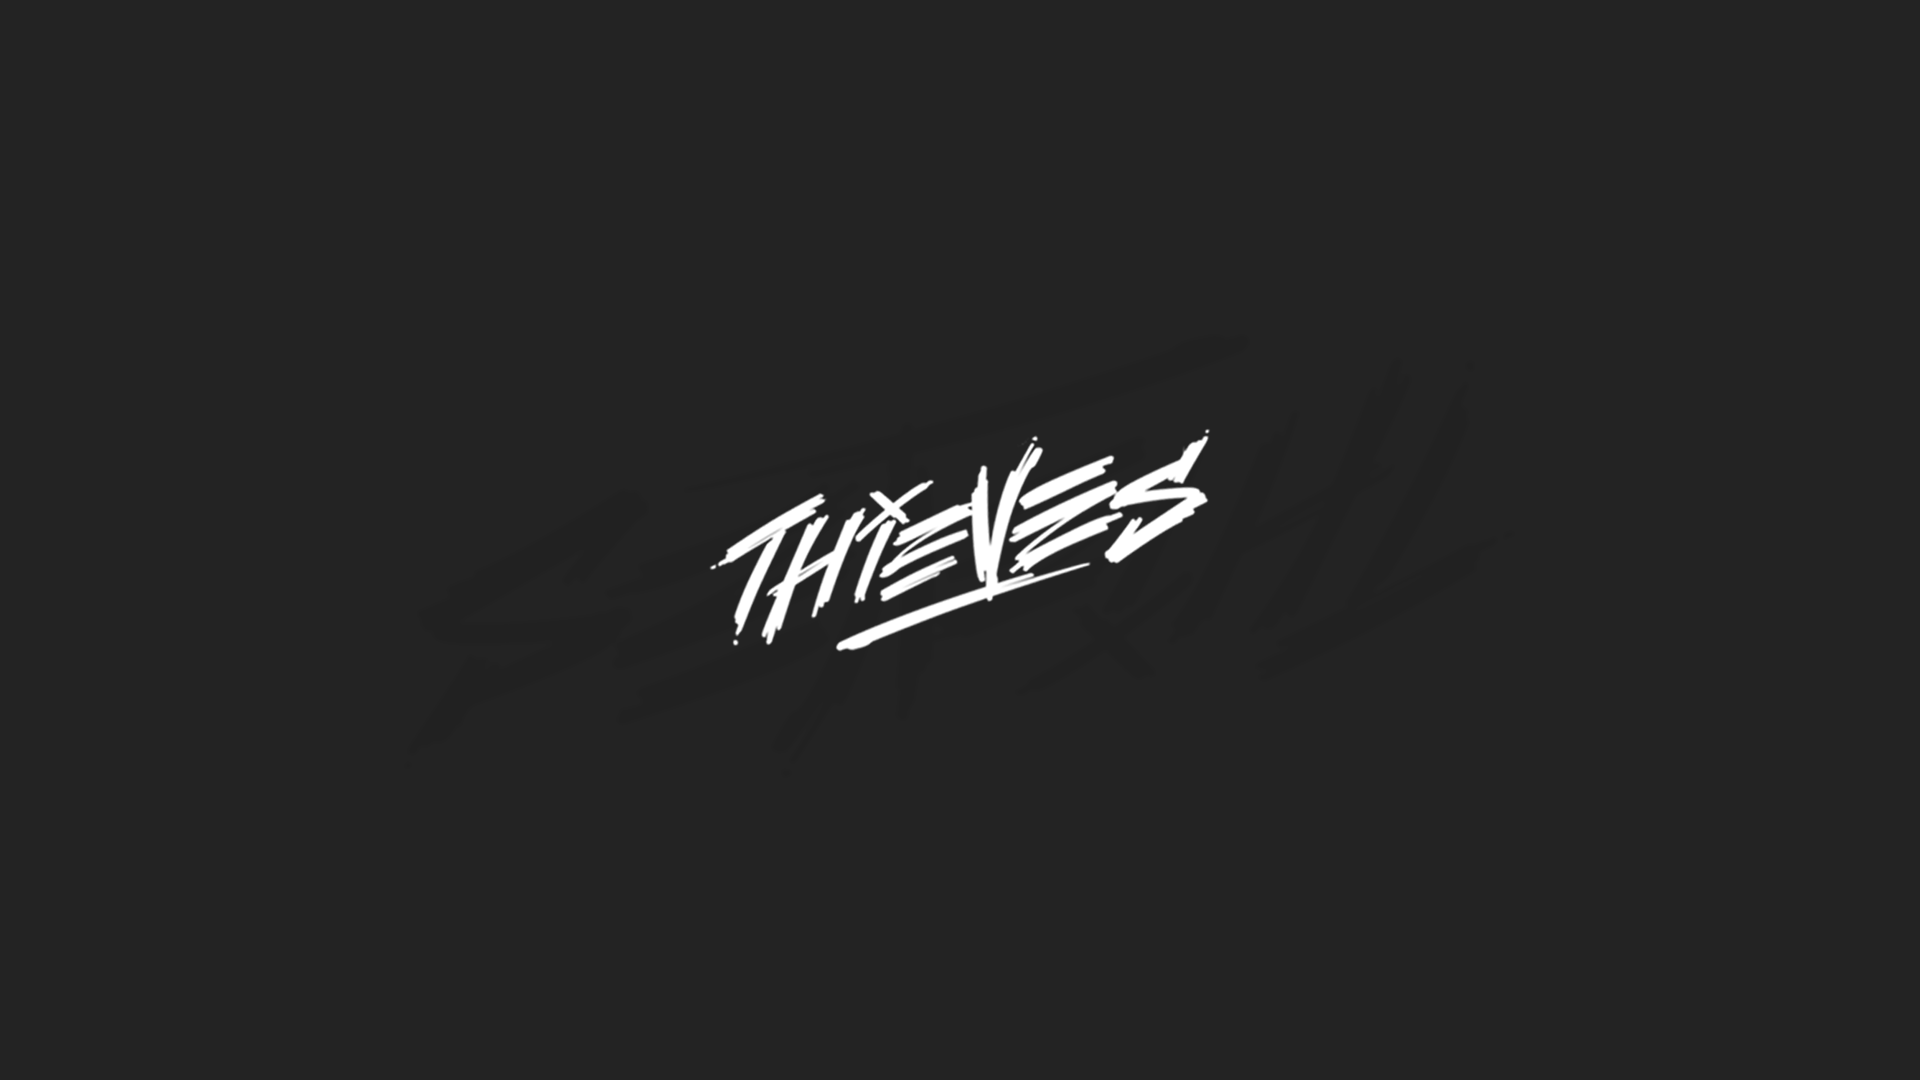 100 Thieves Wallpapers  Top Free 100 Thieves Backgrounds  WallpaperAccess